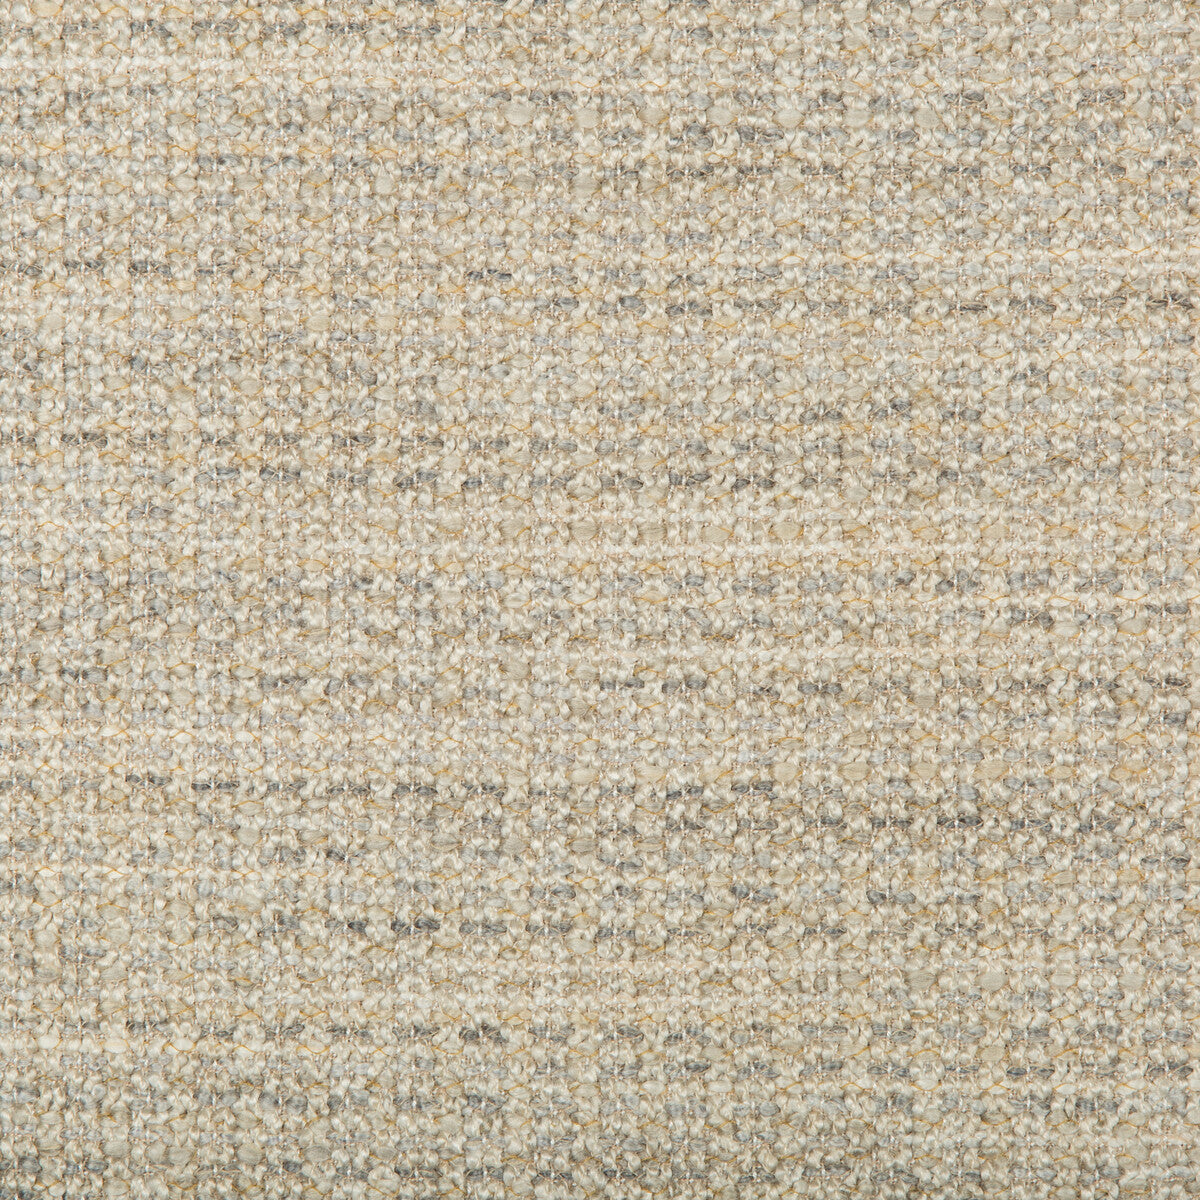 Sandibe Boucle fabric in coconut color - pattern 35511.116.0 - by Kravet Design in the Barclay Butera Sagamore collection